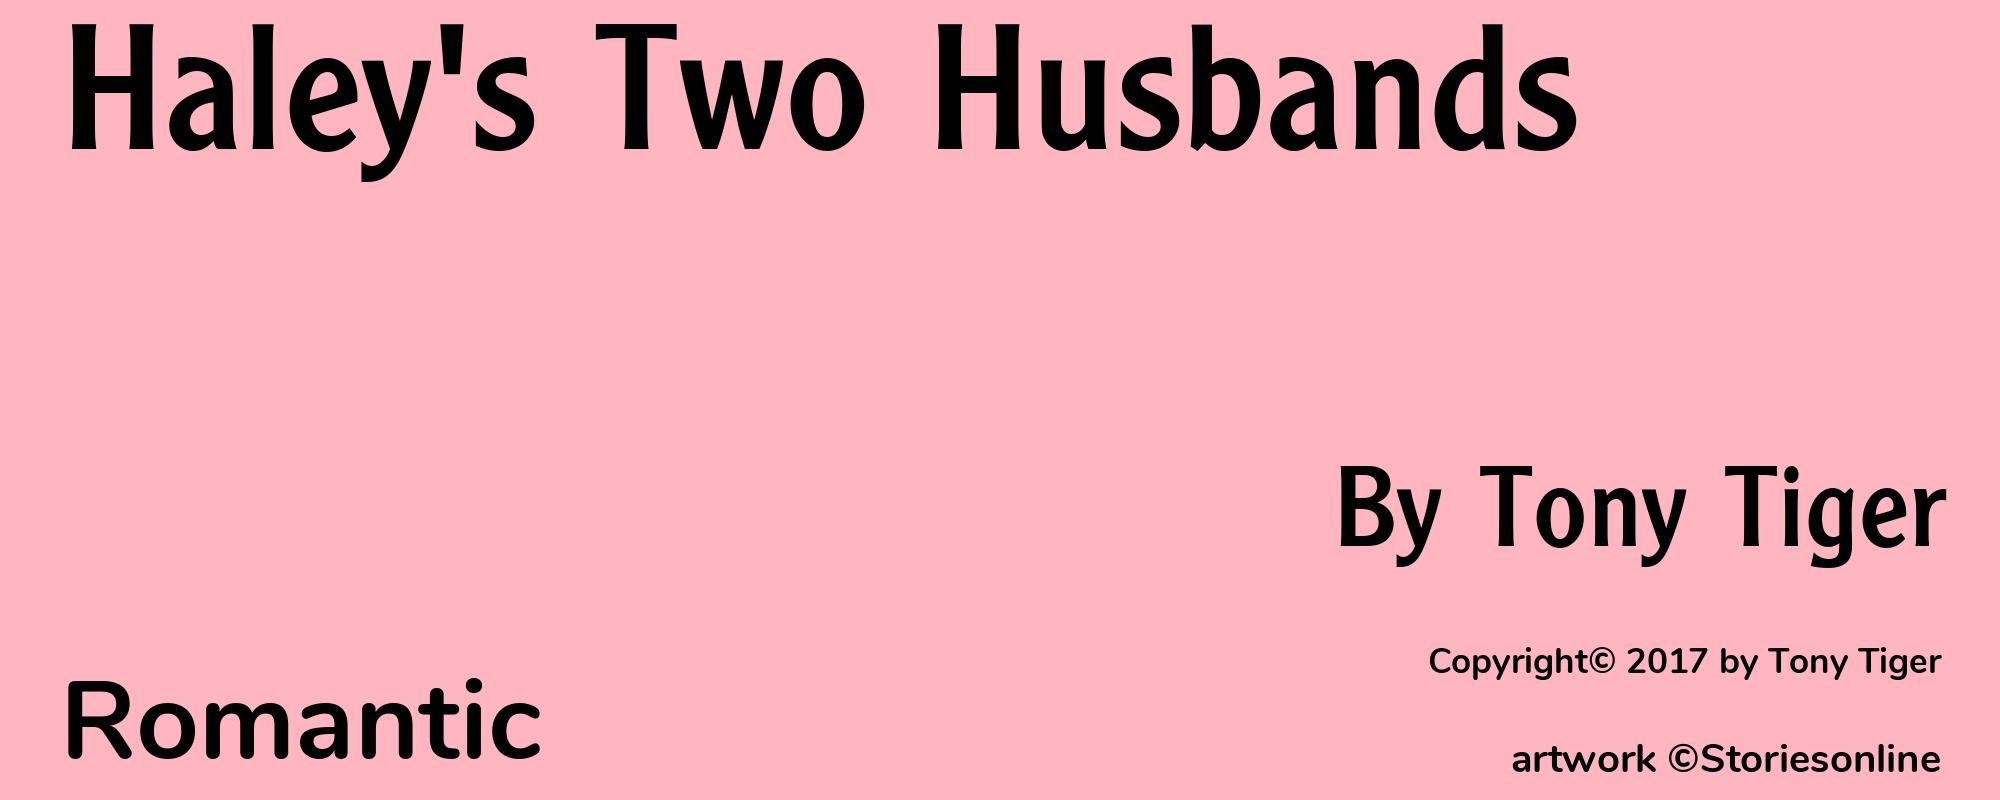 Haley's Two Husbands - Cover